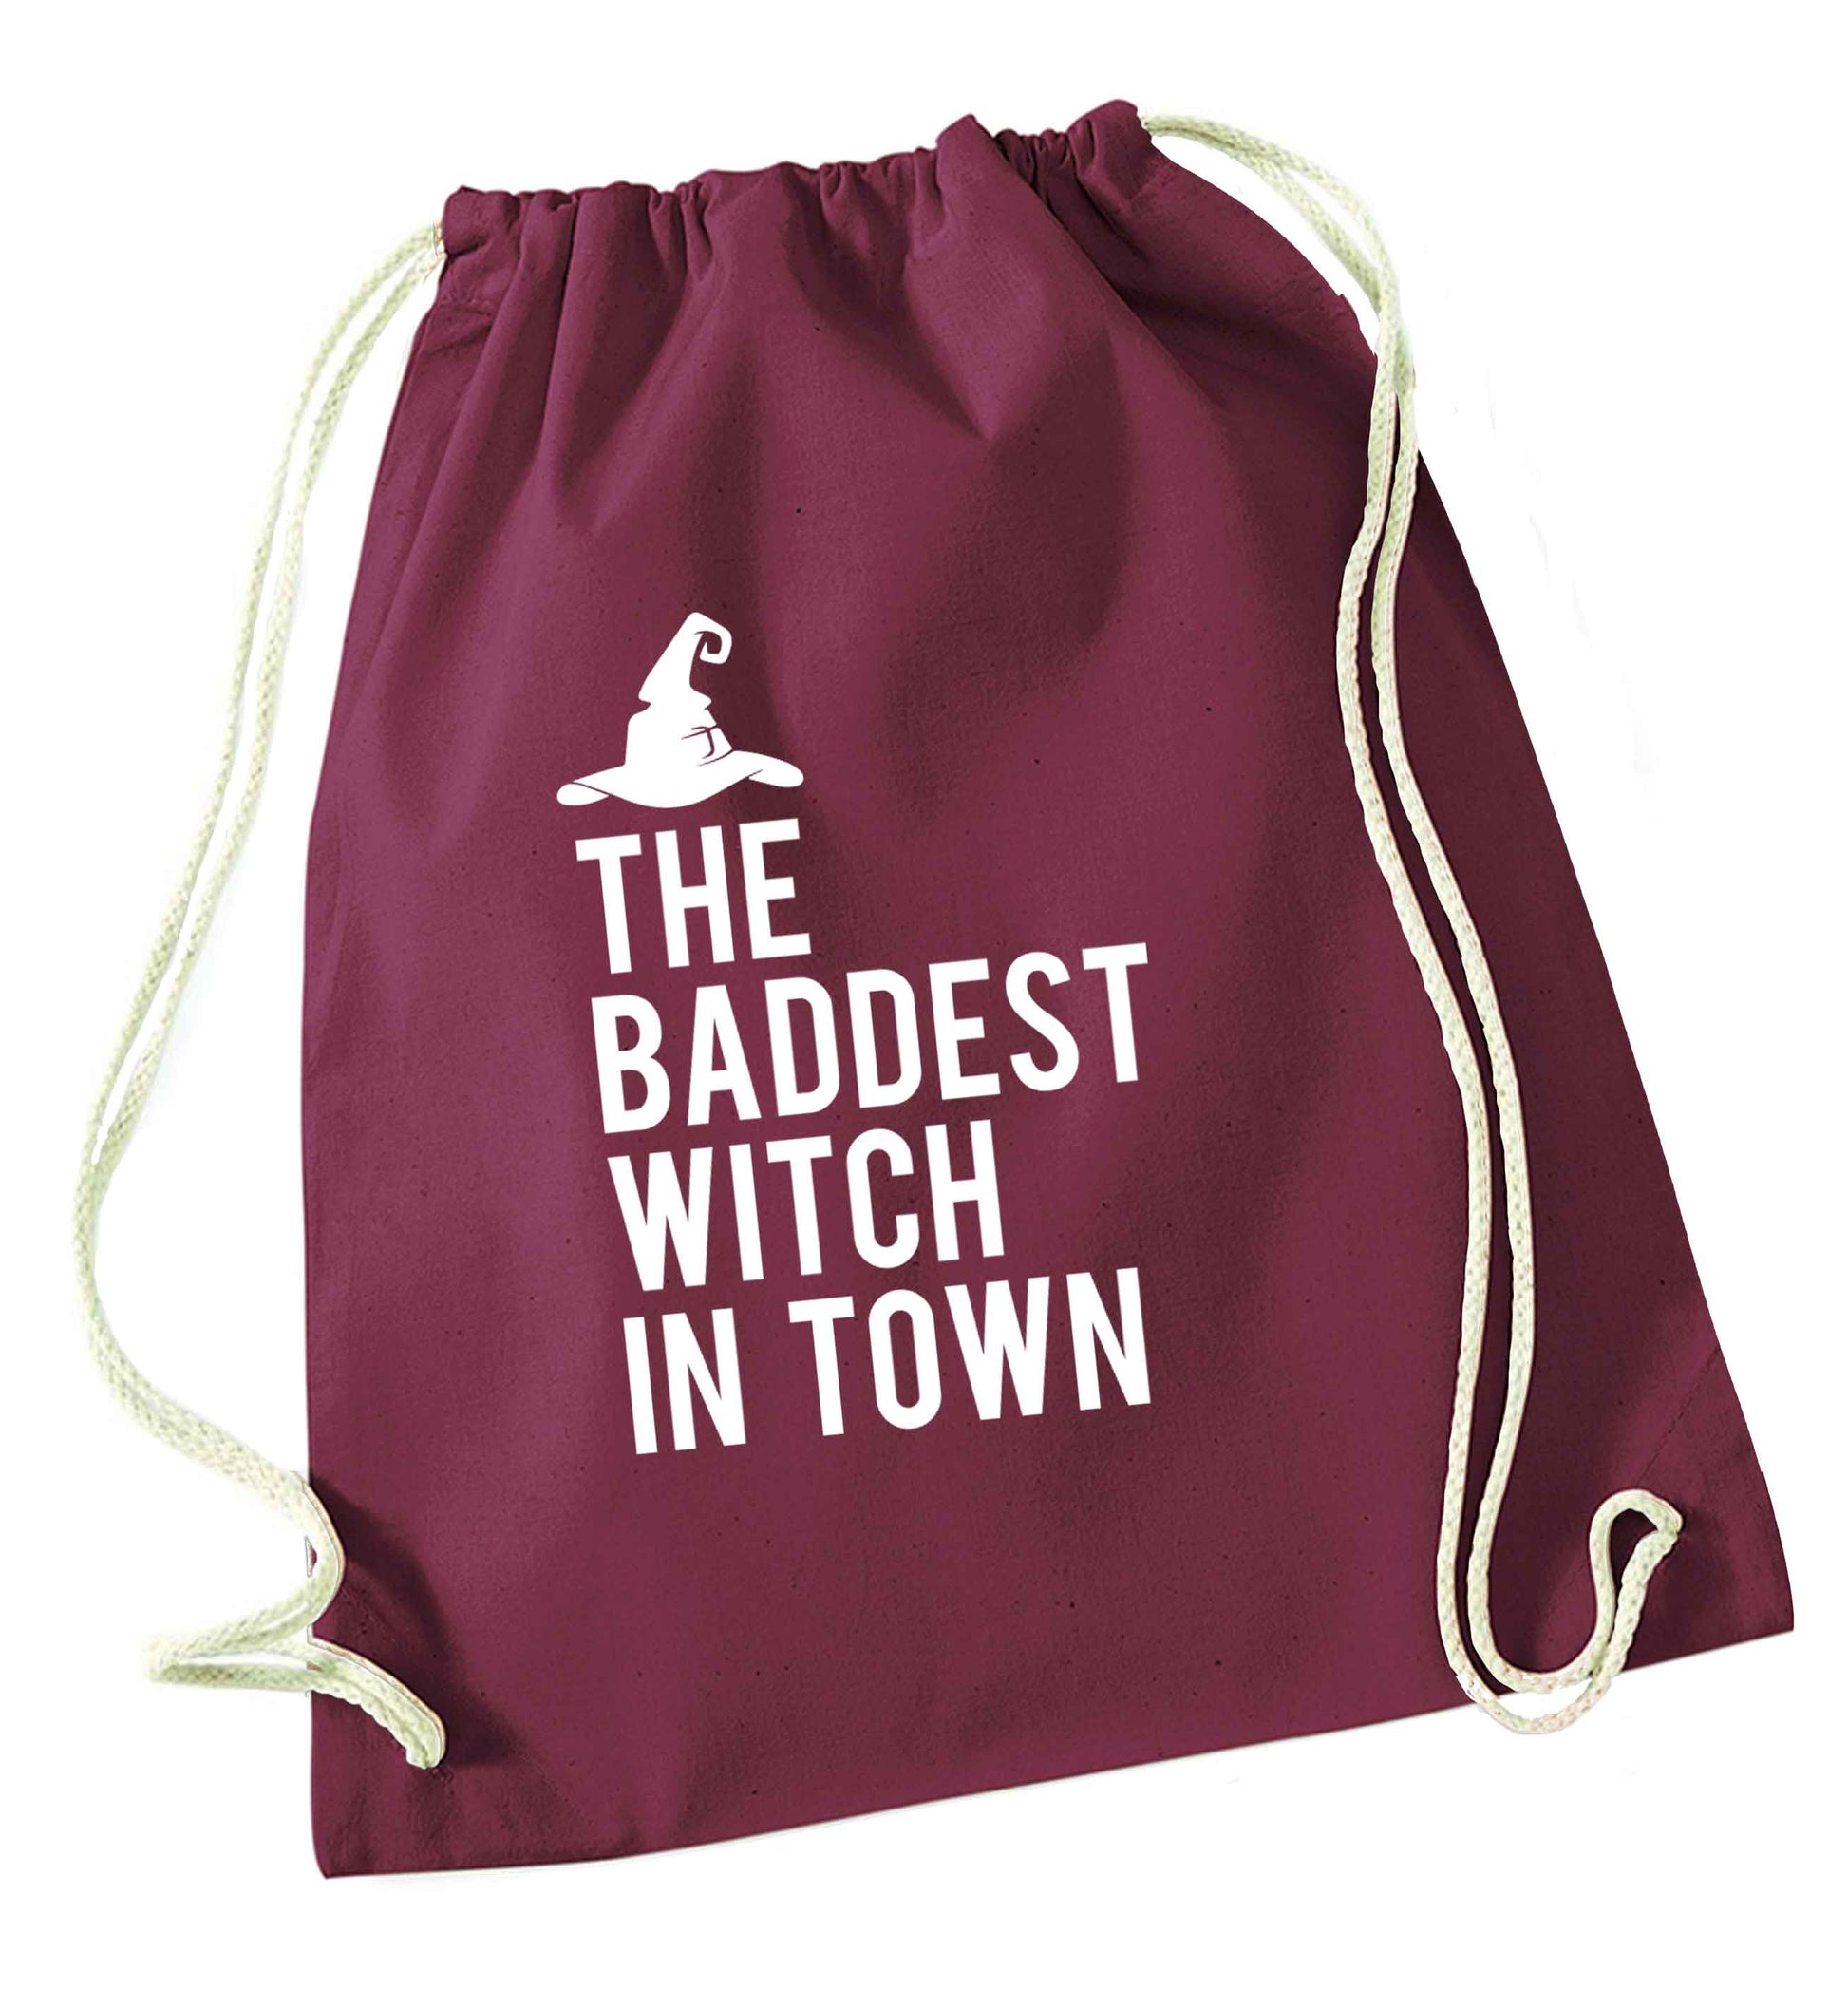 Badest witch in town maroon drawstring bag